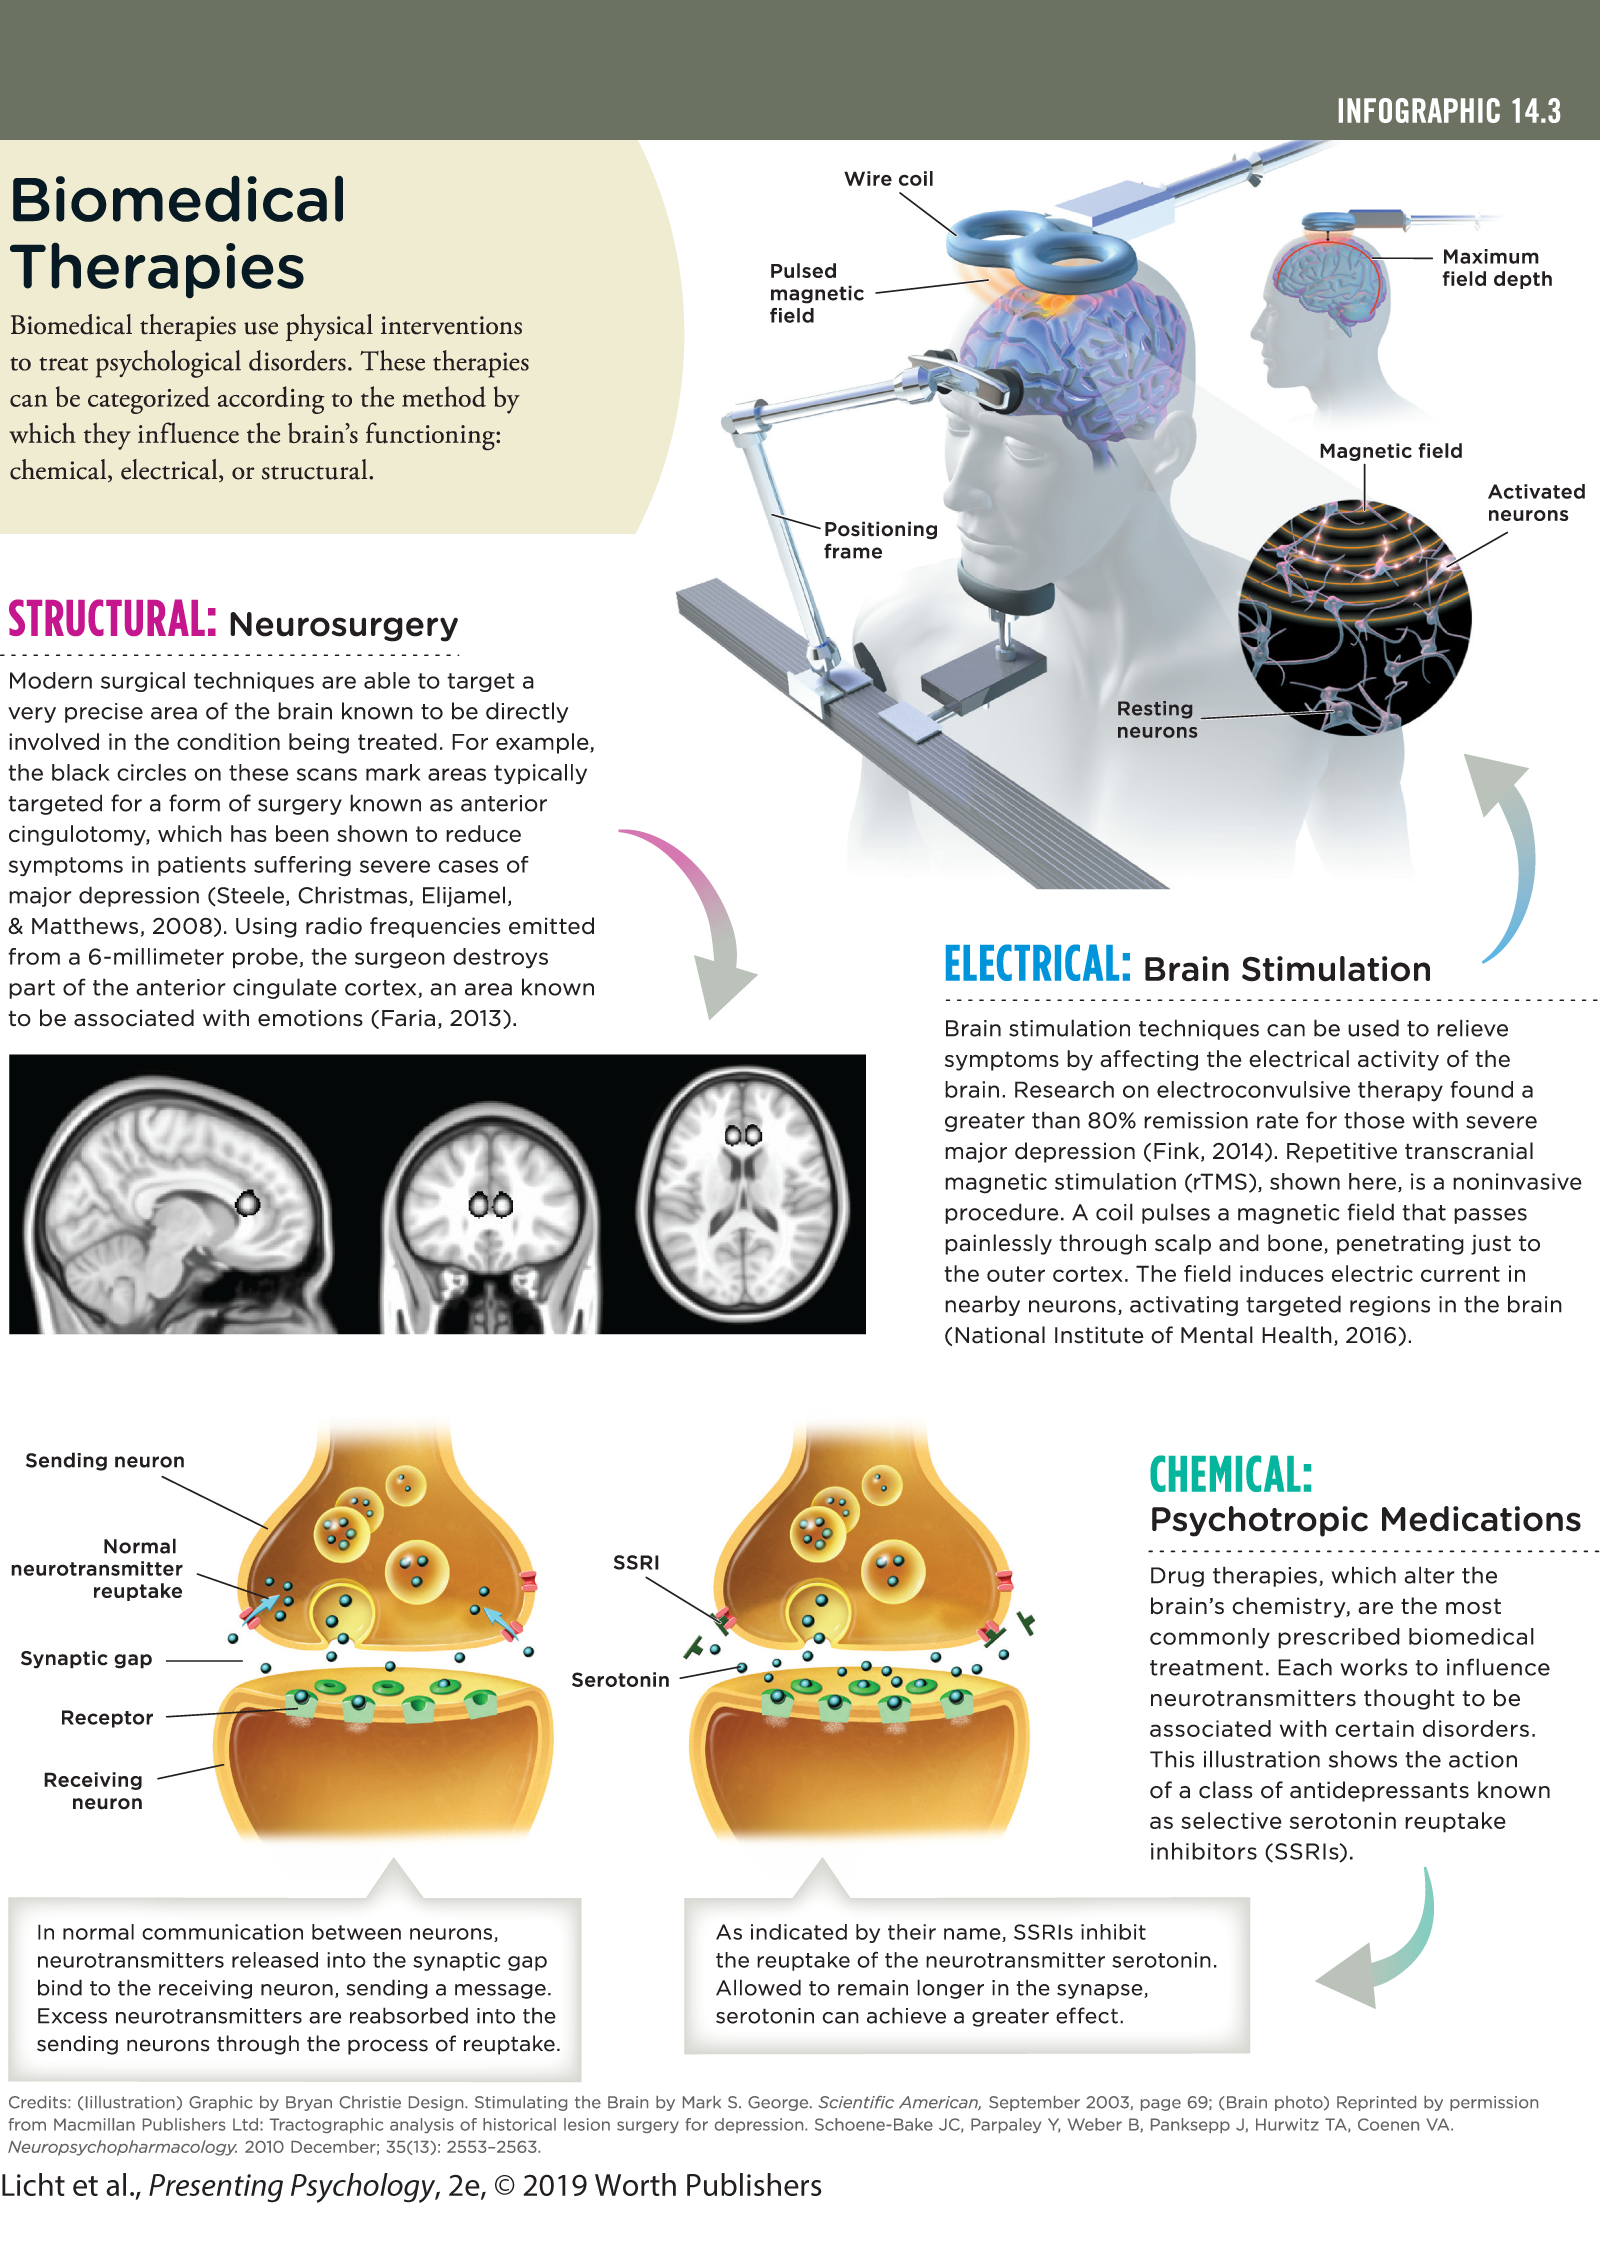 An infographic on biomedical therapies describes the various interventions used to treat psychological disorders. You can read full description from the link below